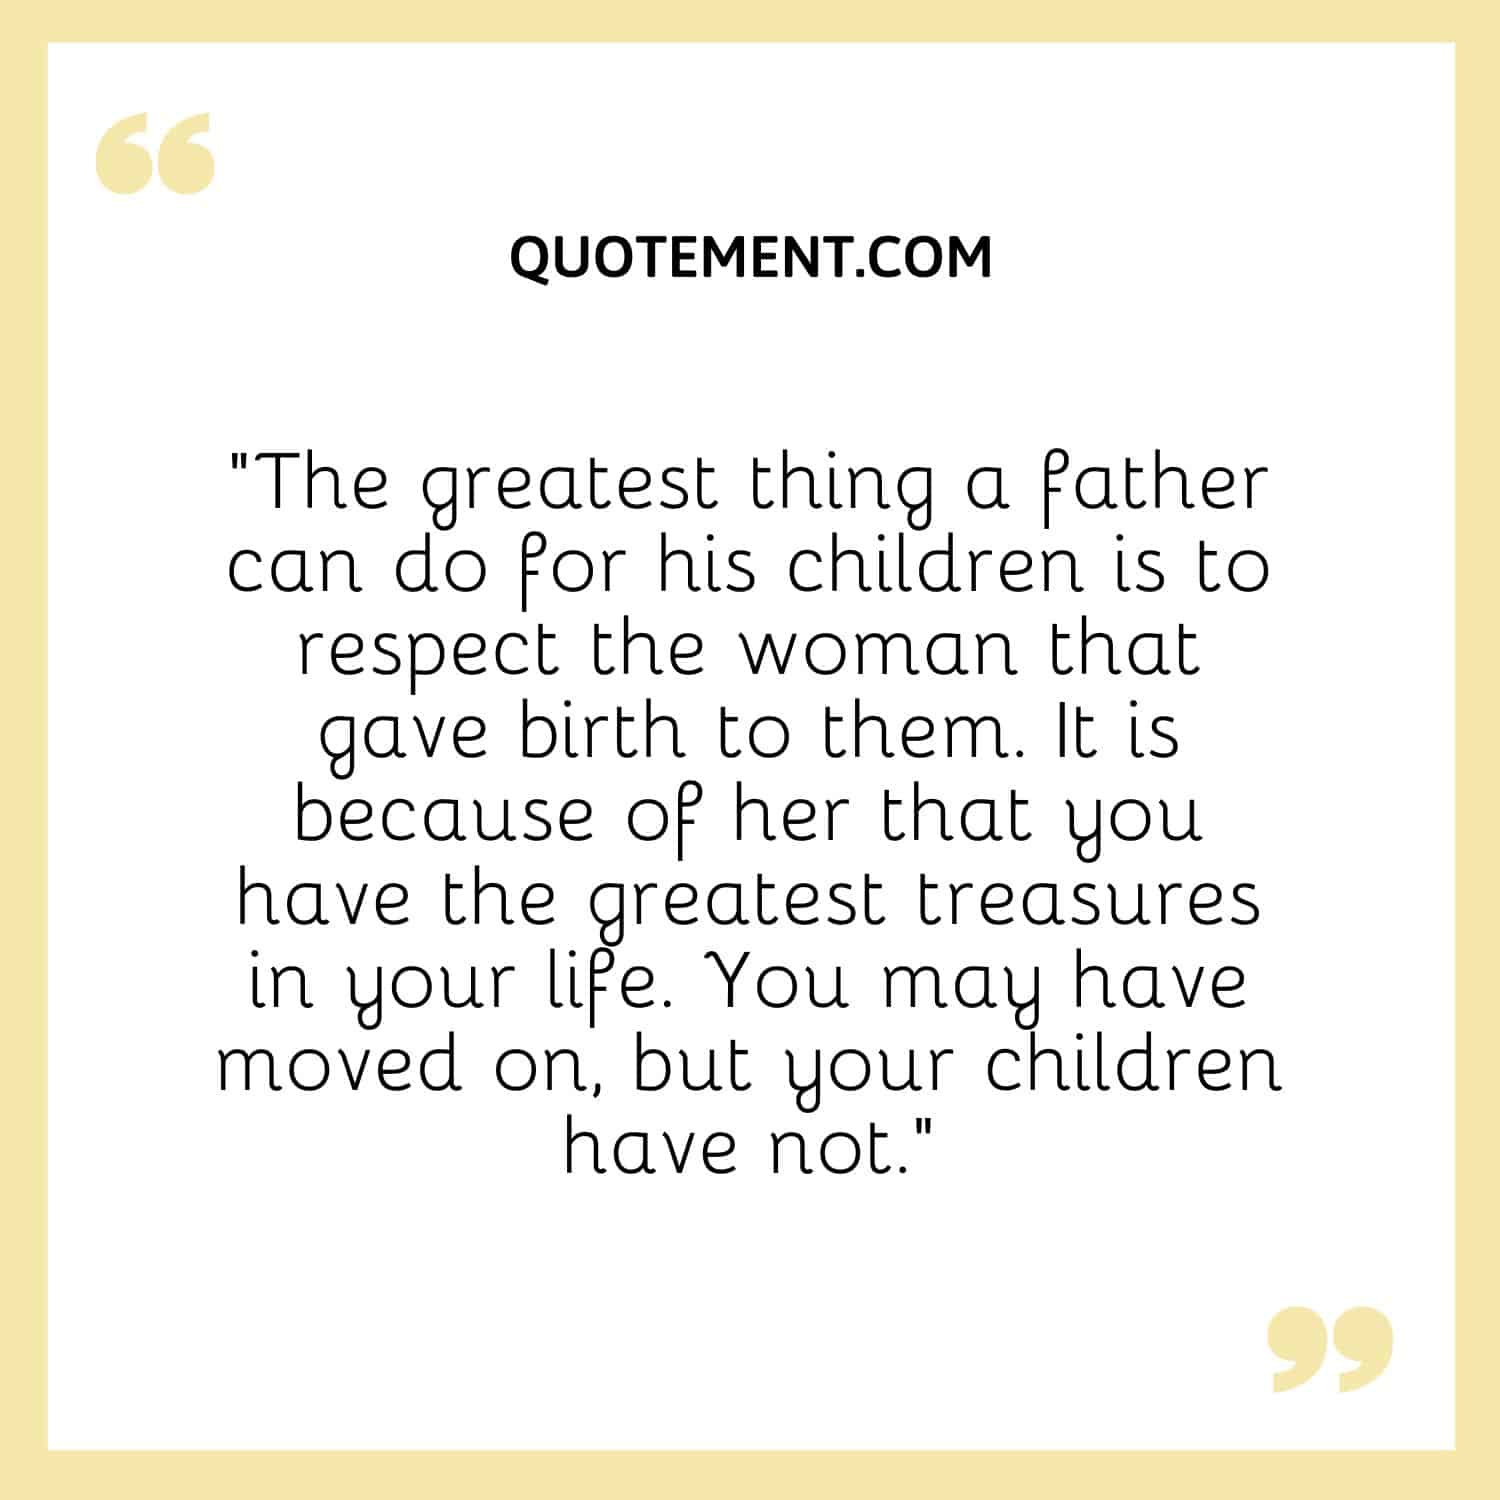 The greatest thing a father can do for his children is to respect the woman that gave birth to them